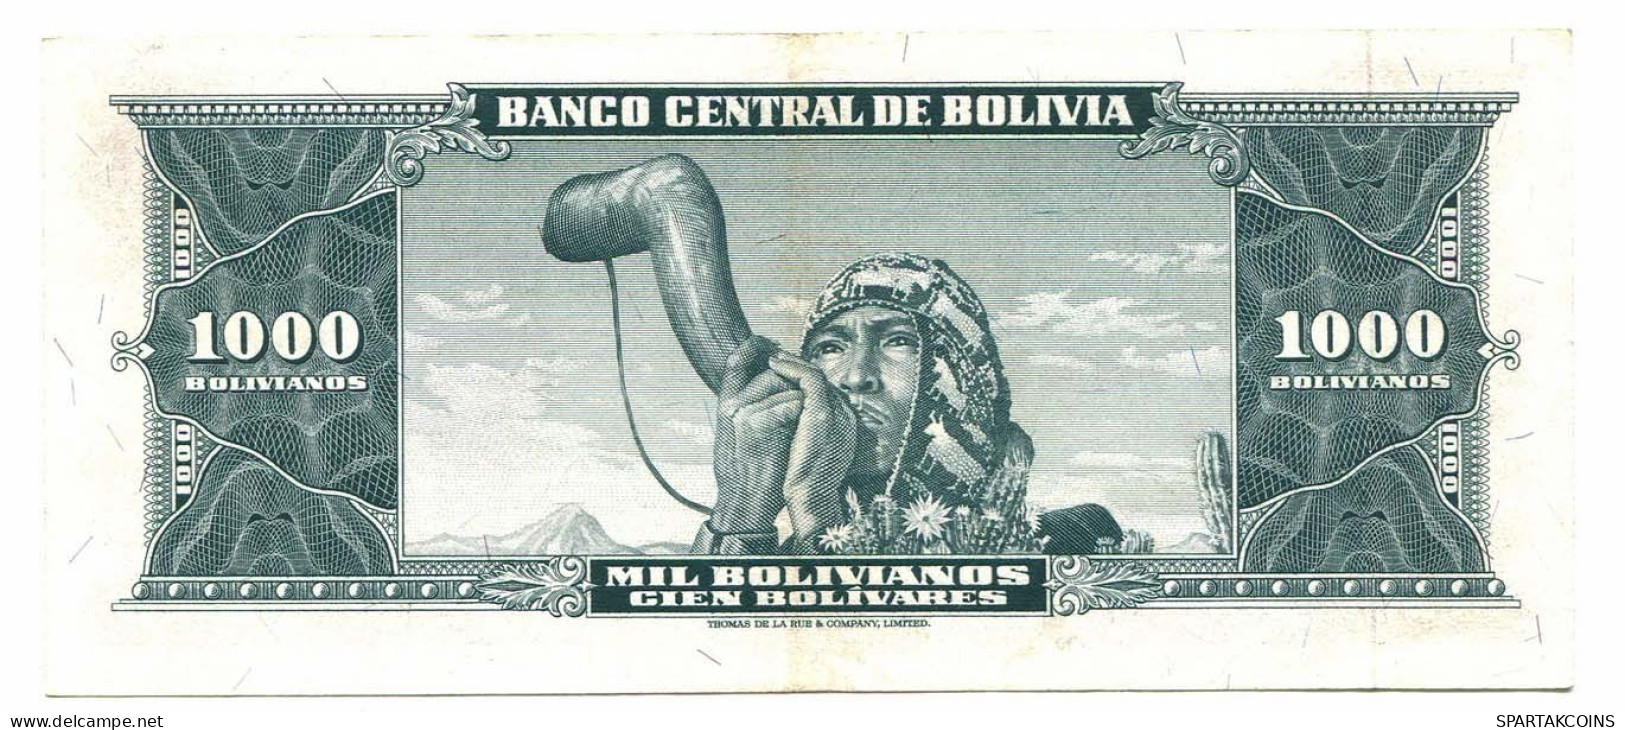 BOLIVIA 1000 BOLIVIANOS 1945 SERIE L AUNC Paper Money Banknote #P10806.4 - [11] Local Banknote Issues